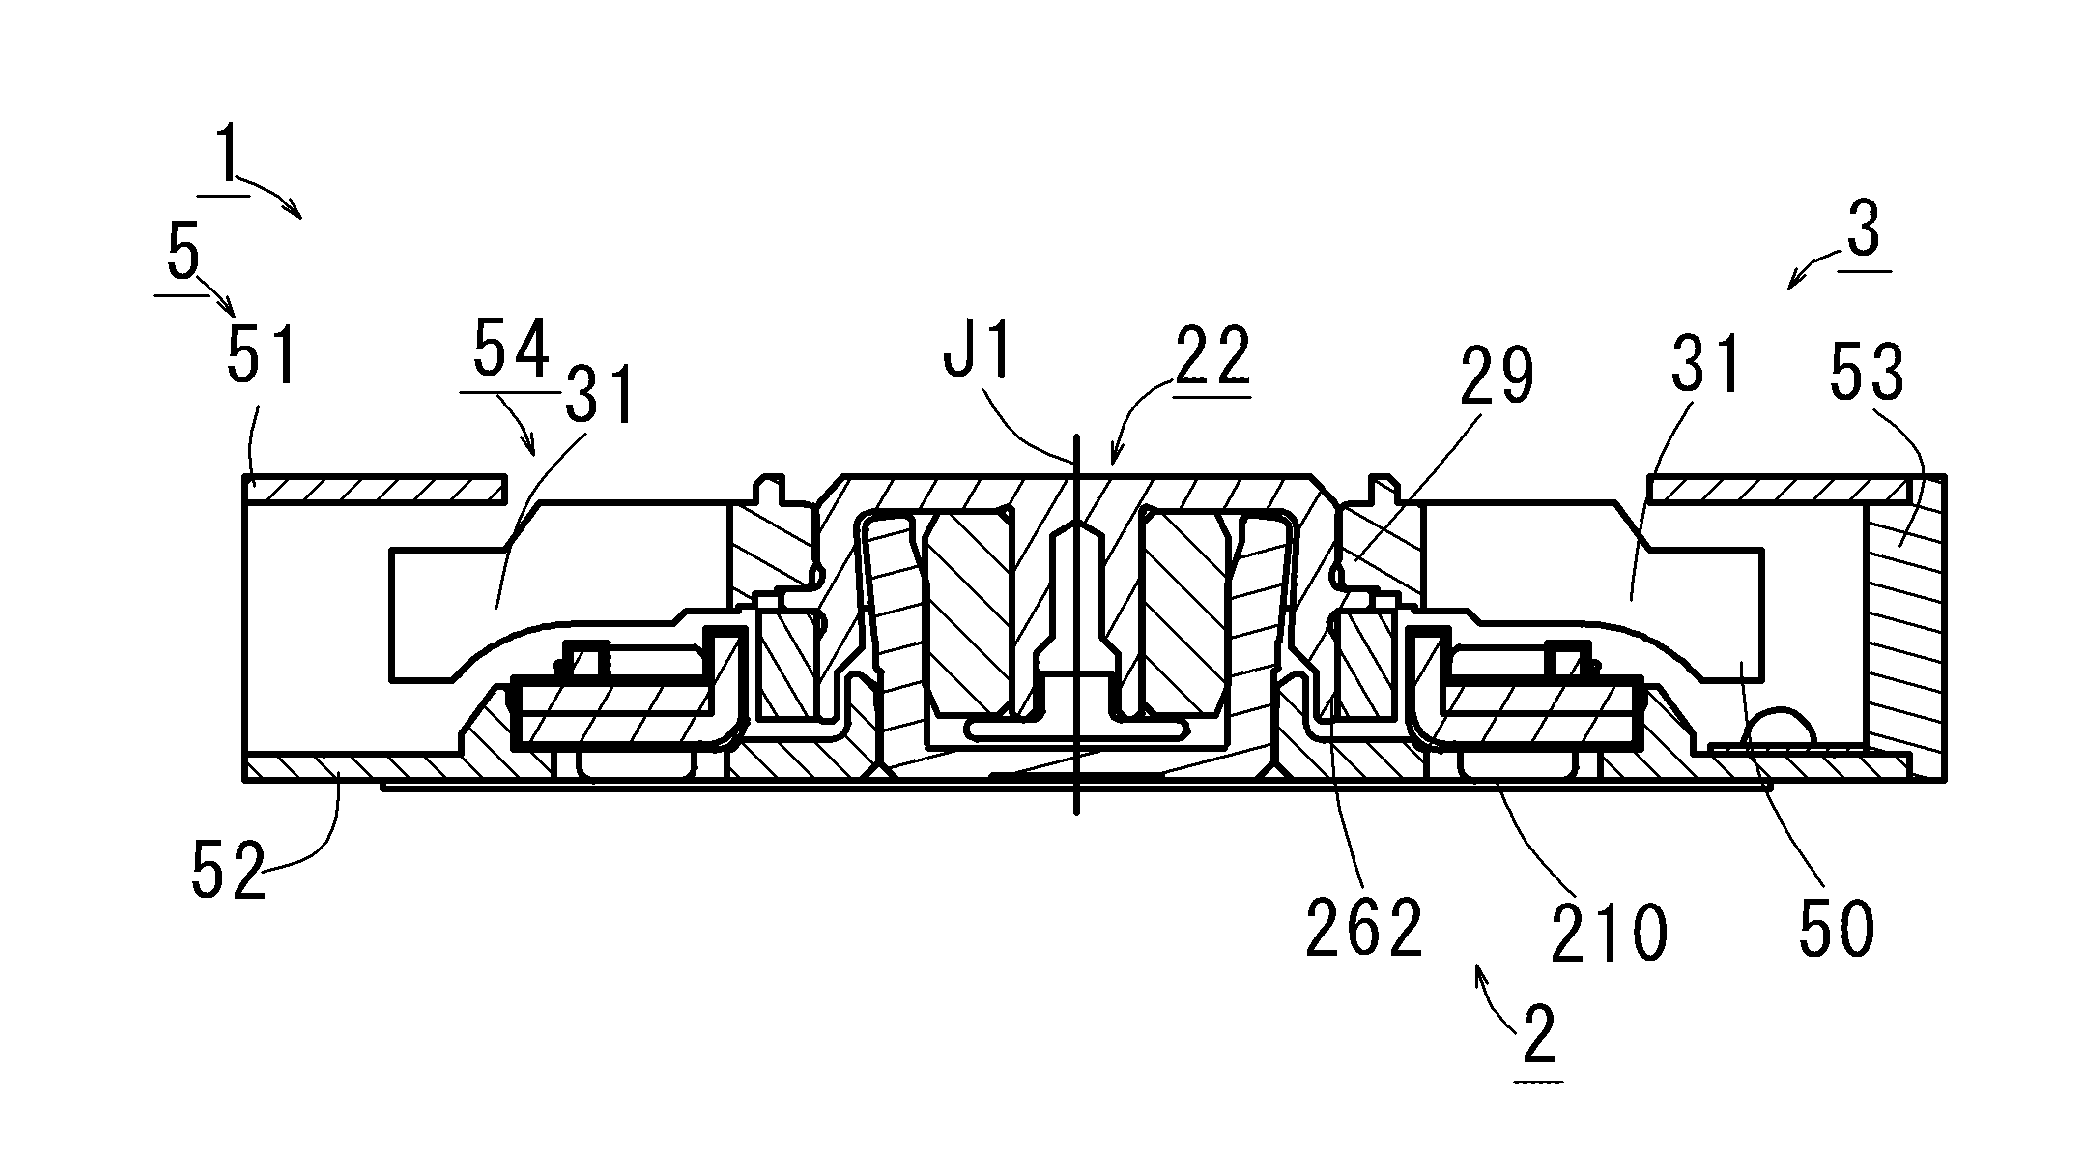 Blower fan and electronic device